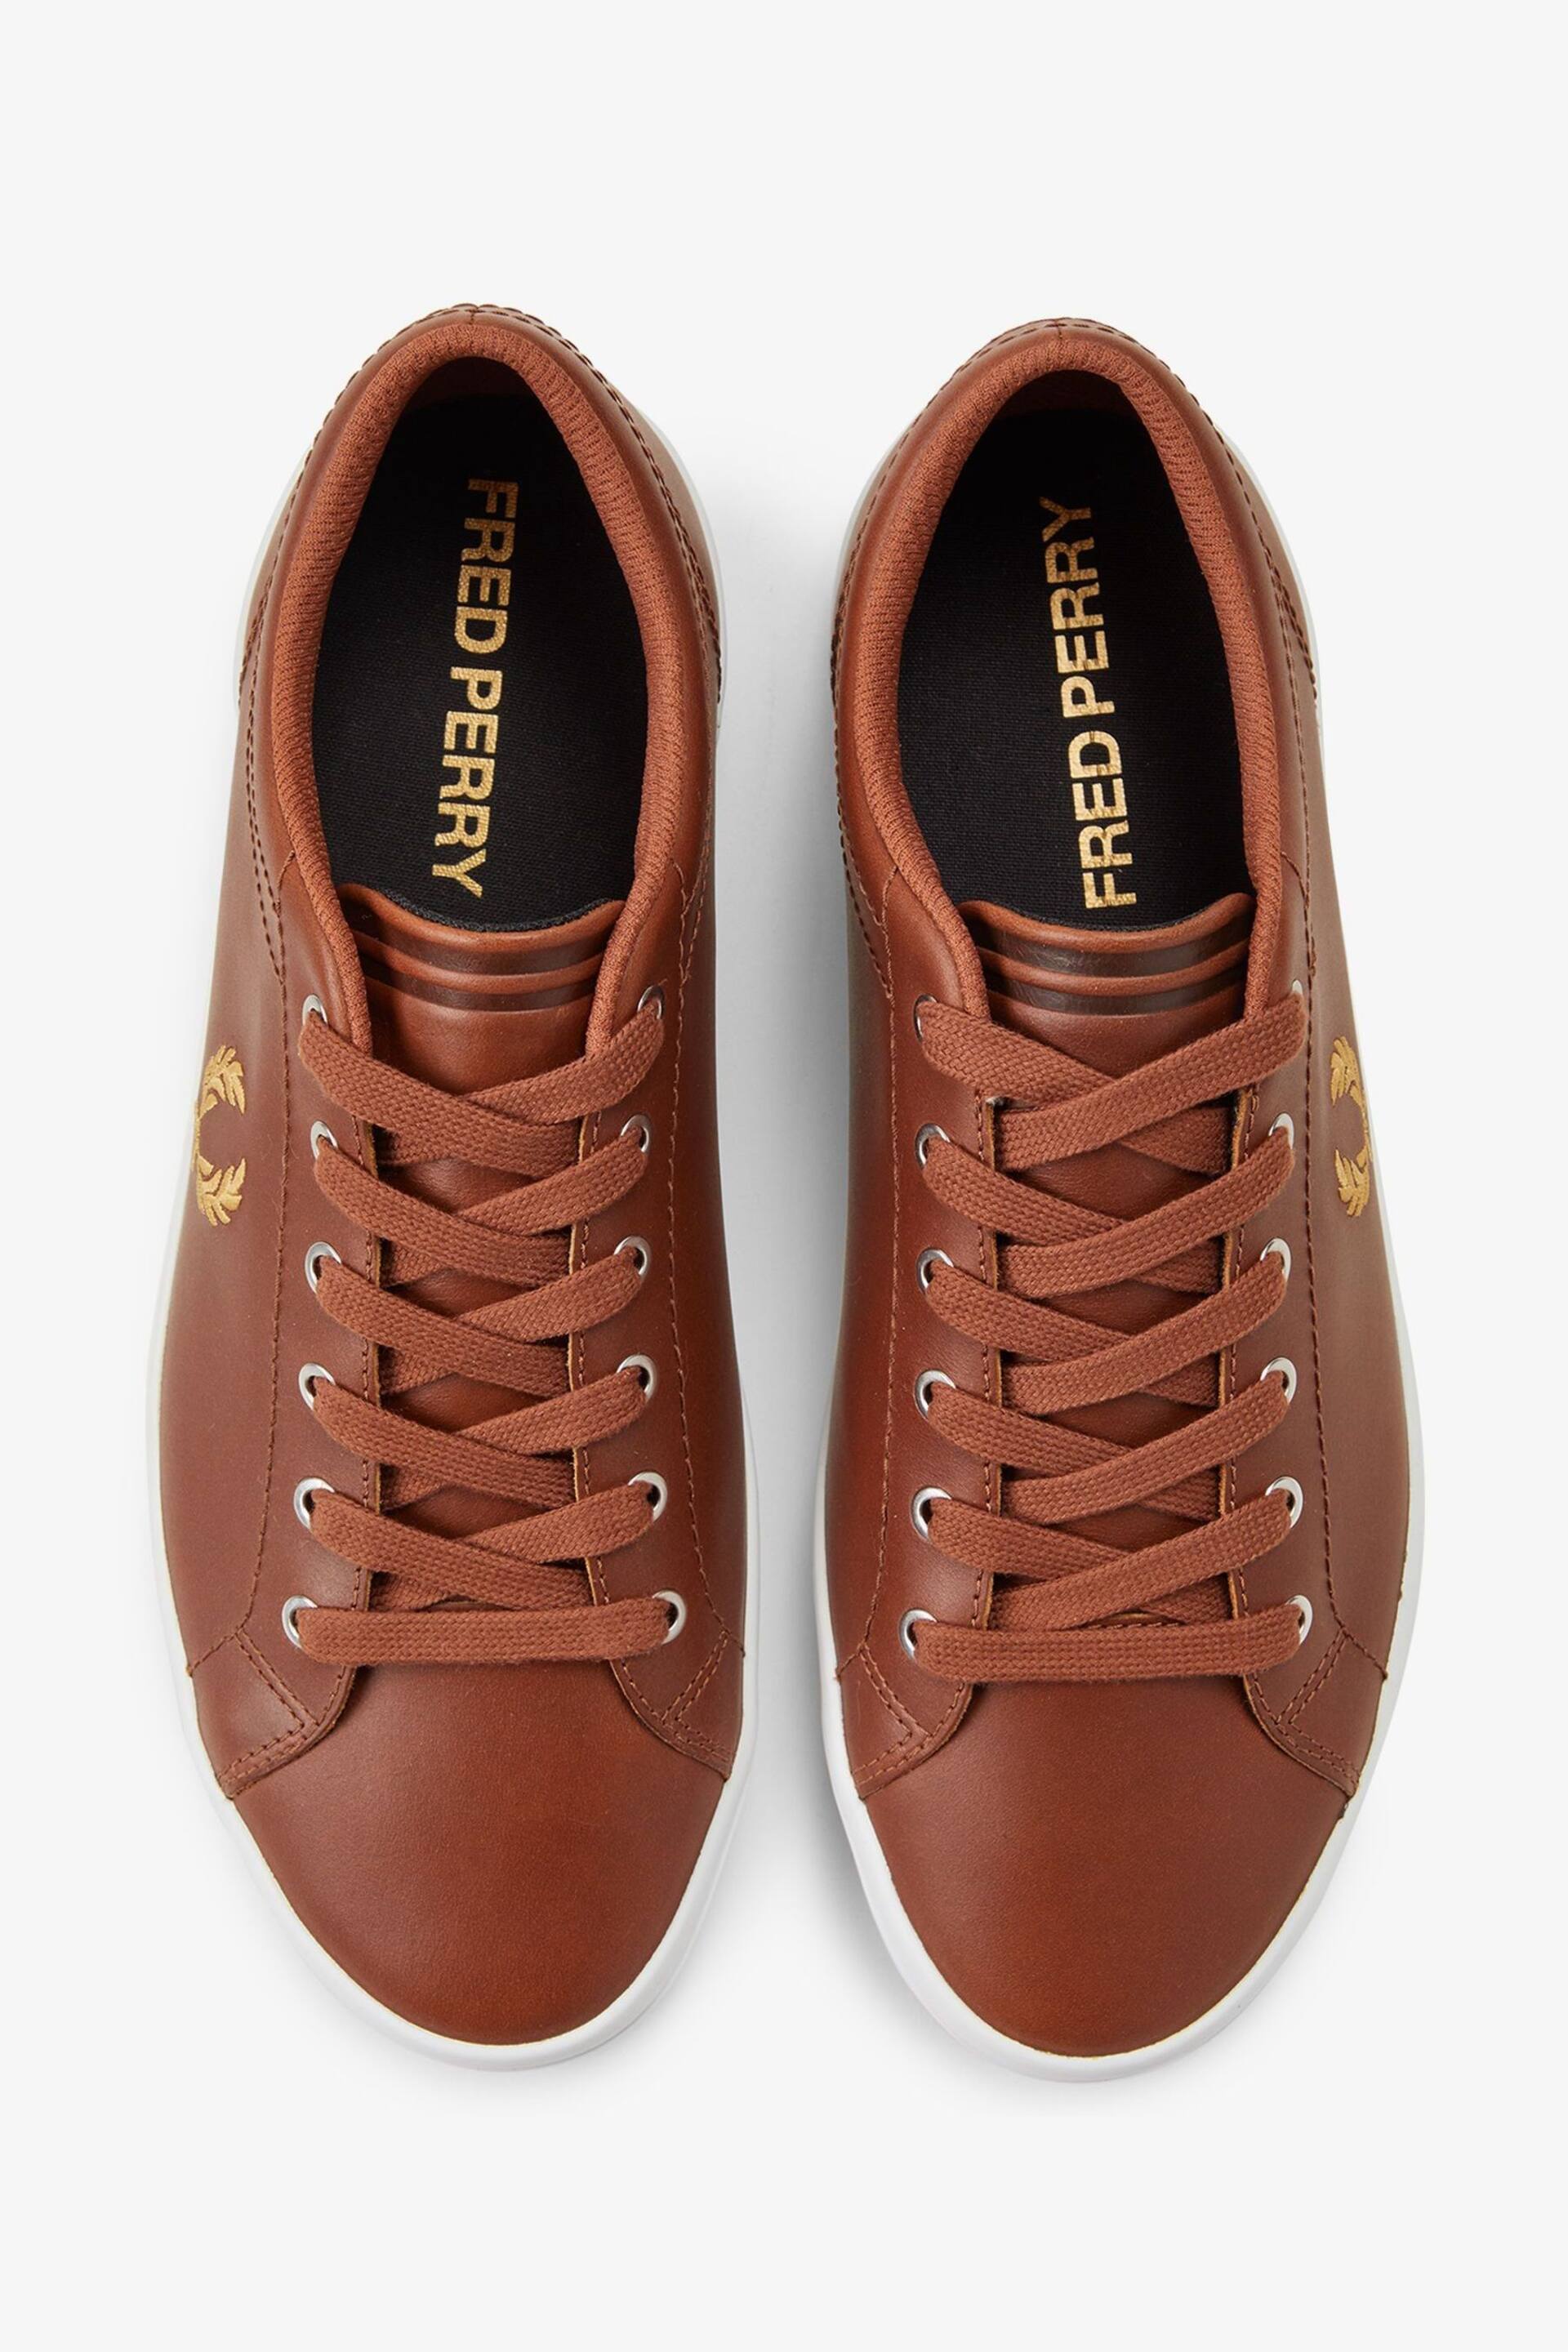 Fred Perry Baseline Tennis Trainers - Image 4 of 5